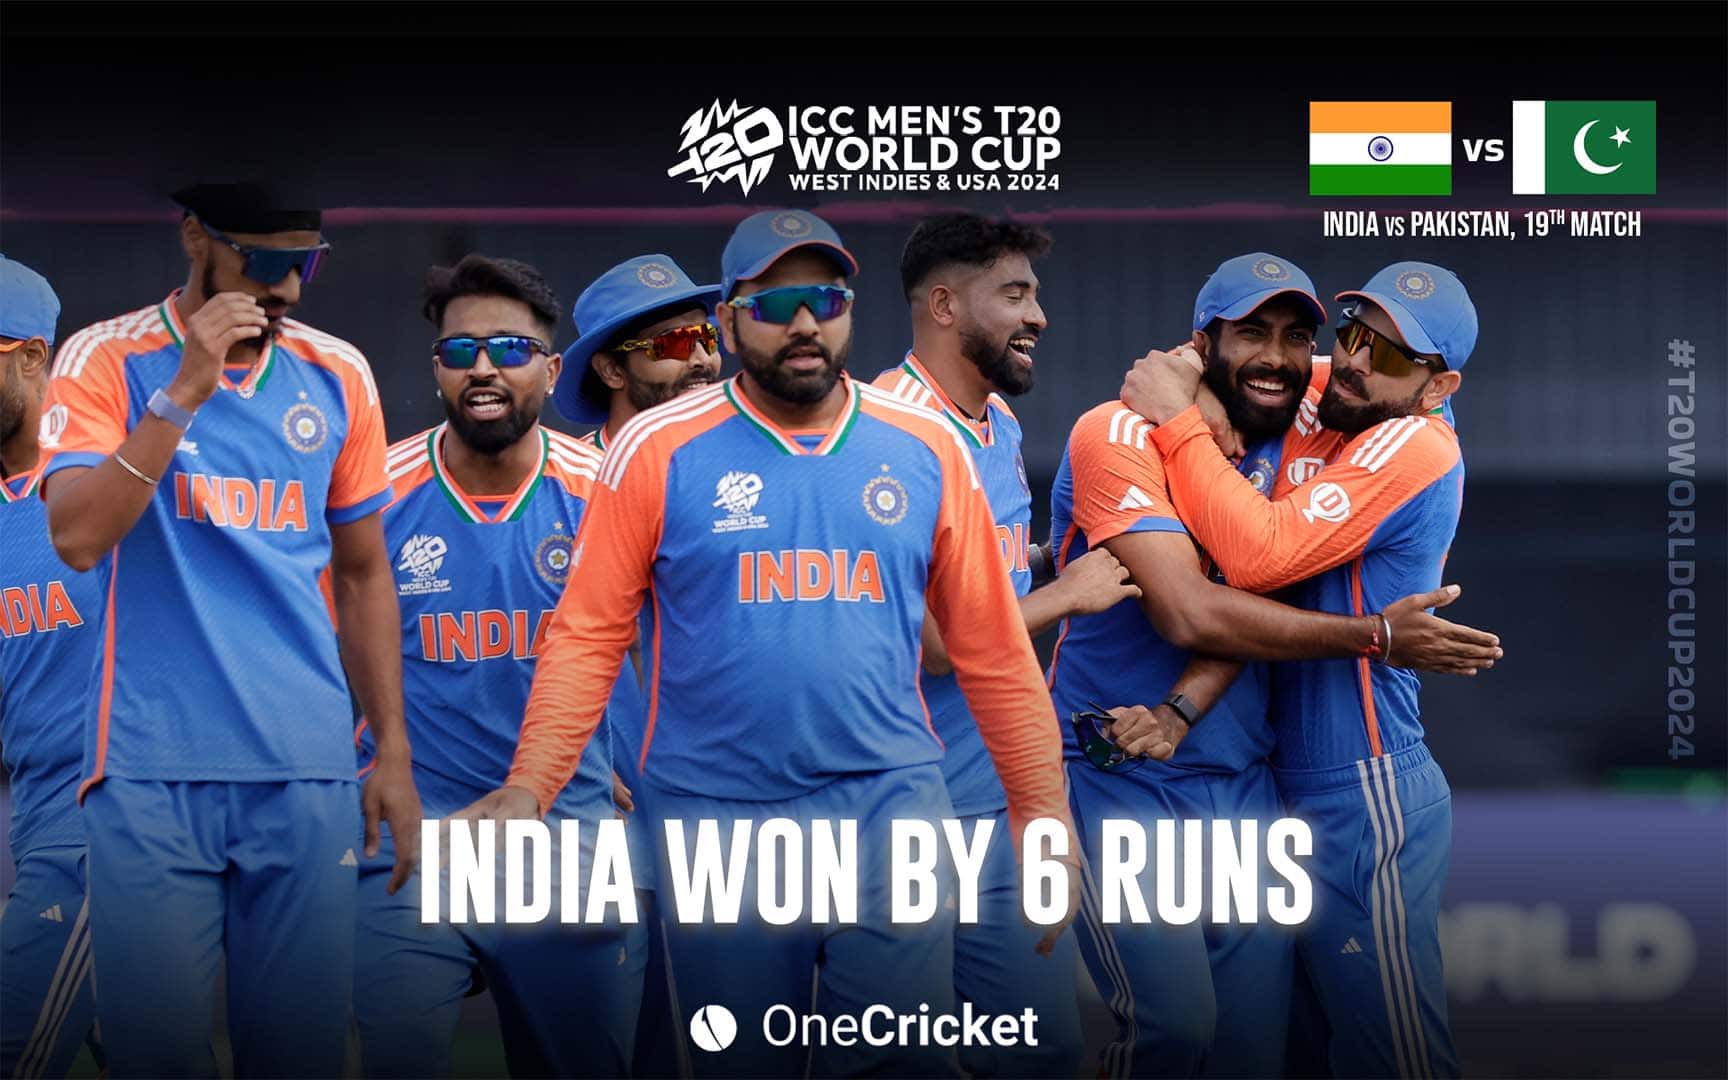 Bumrah-inspired bowling takes down PAK in New York (OneCricket)